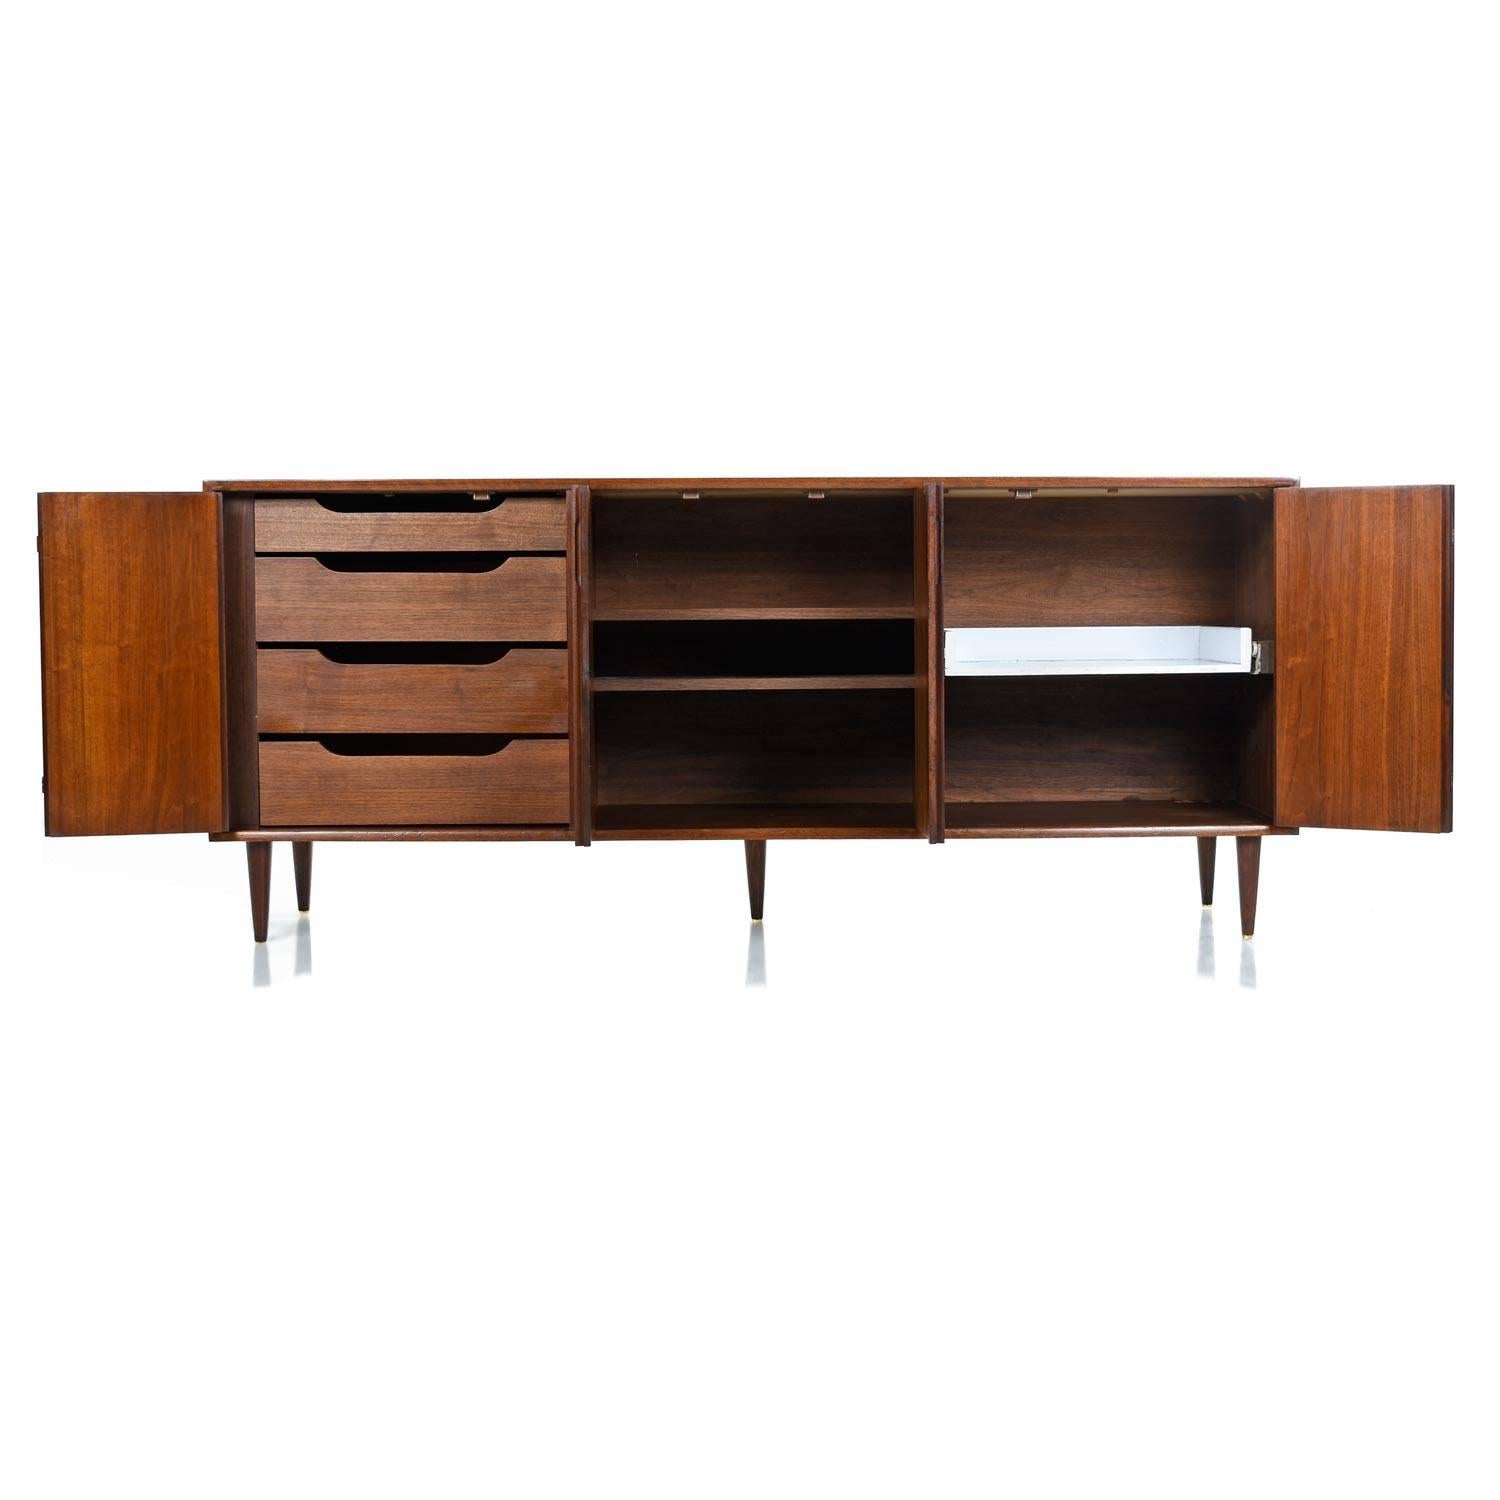 Restored Mid-Century Modern American made walnut credenza. The simple design is intriguing in the way that it balances modern and traditional themes. The exceptional length is the perfect dimension for your flat screen TV if you choose to use this